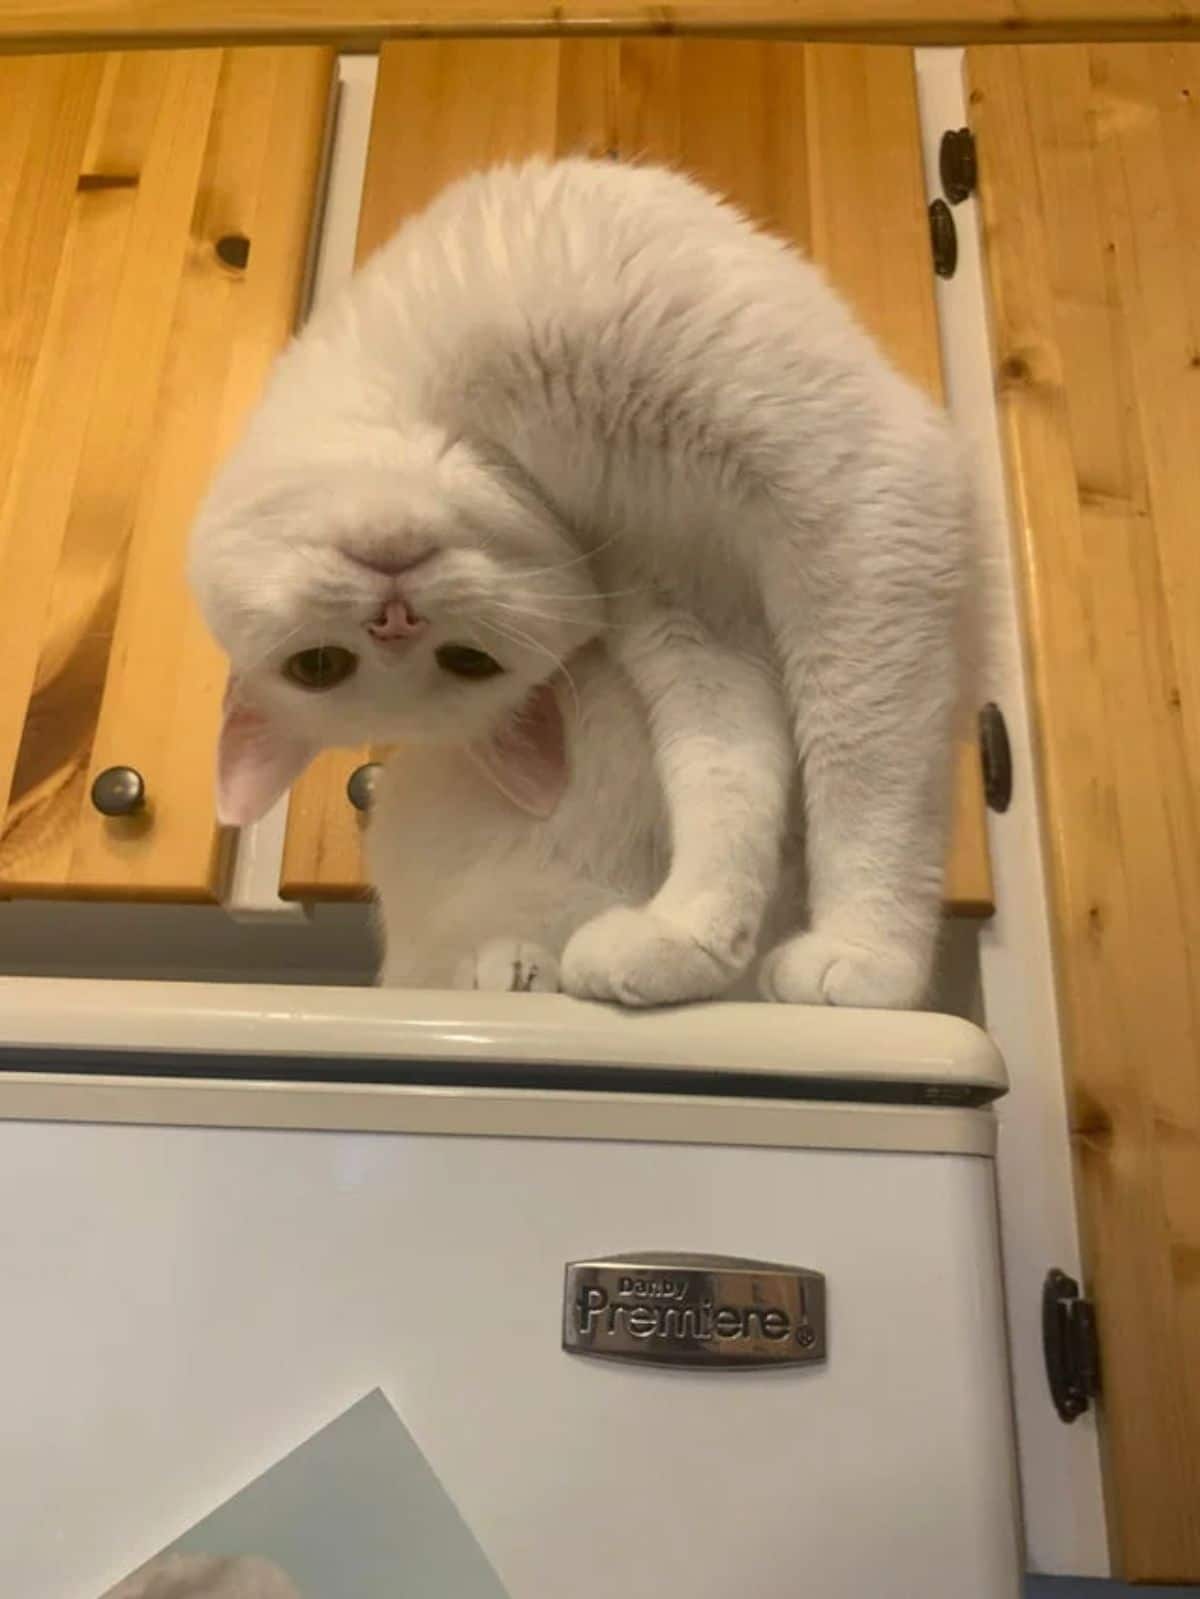 white cat sitting on a white fridge looking down with the head curved to the side and down